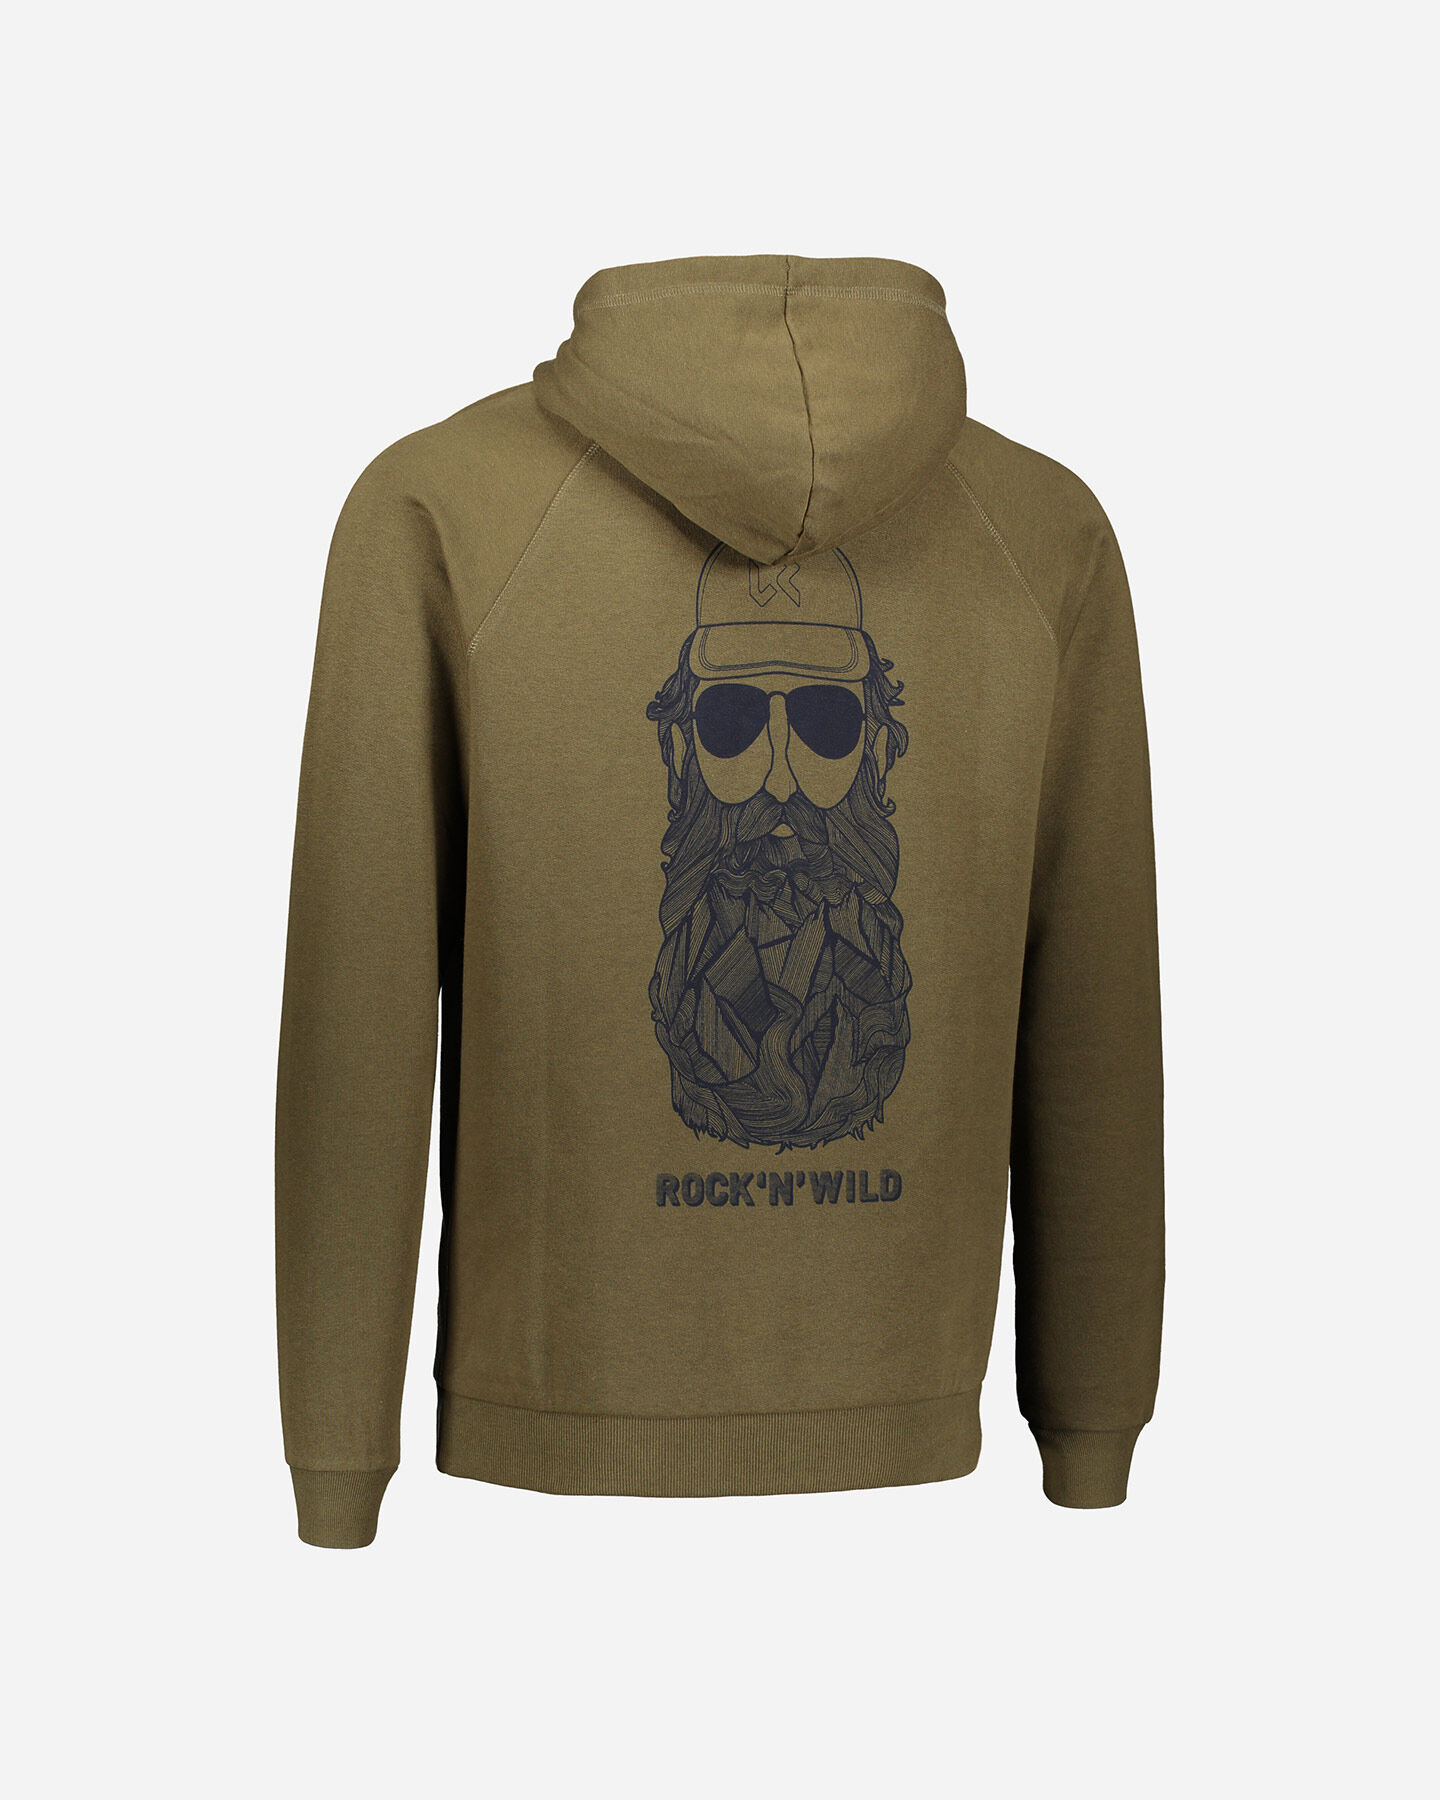  Felpa ROCK EXPERIENCE HOODIE COMPLEX M S4095875|1924|S scatto 1